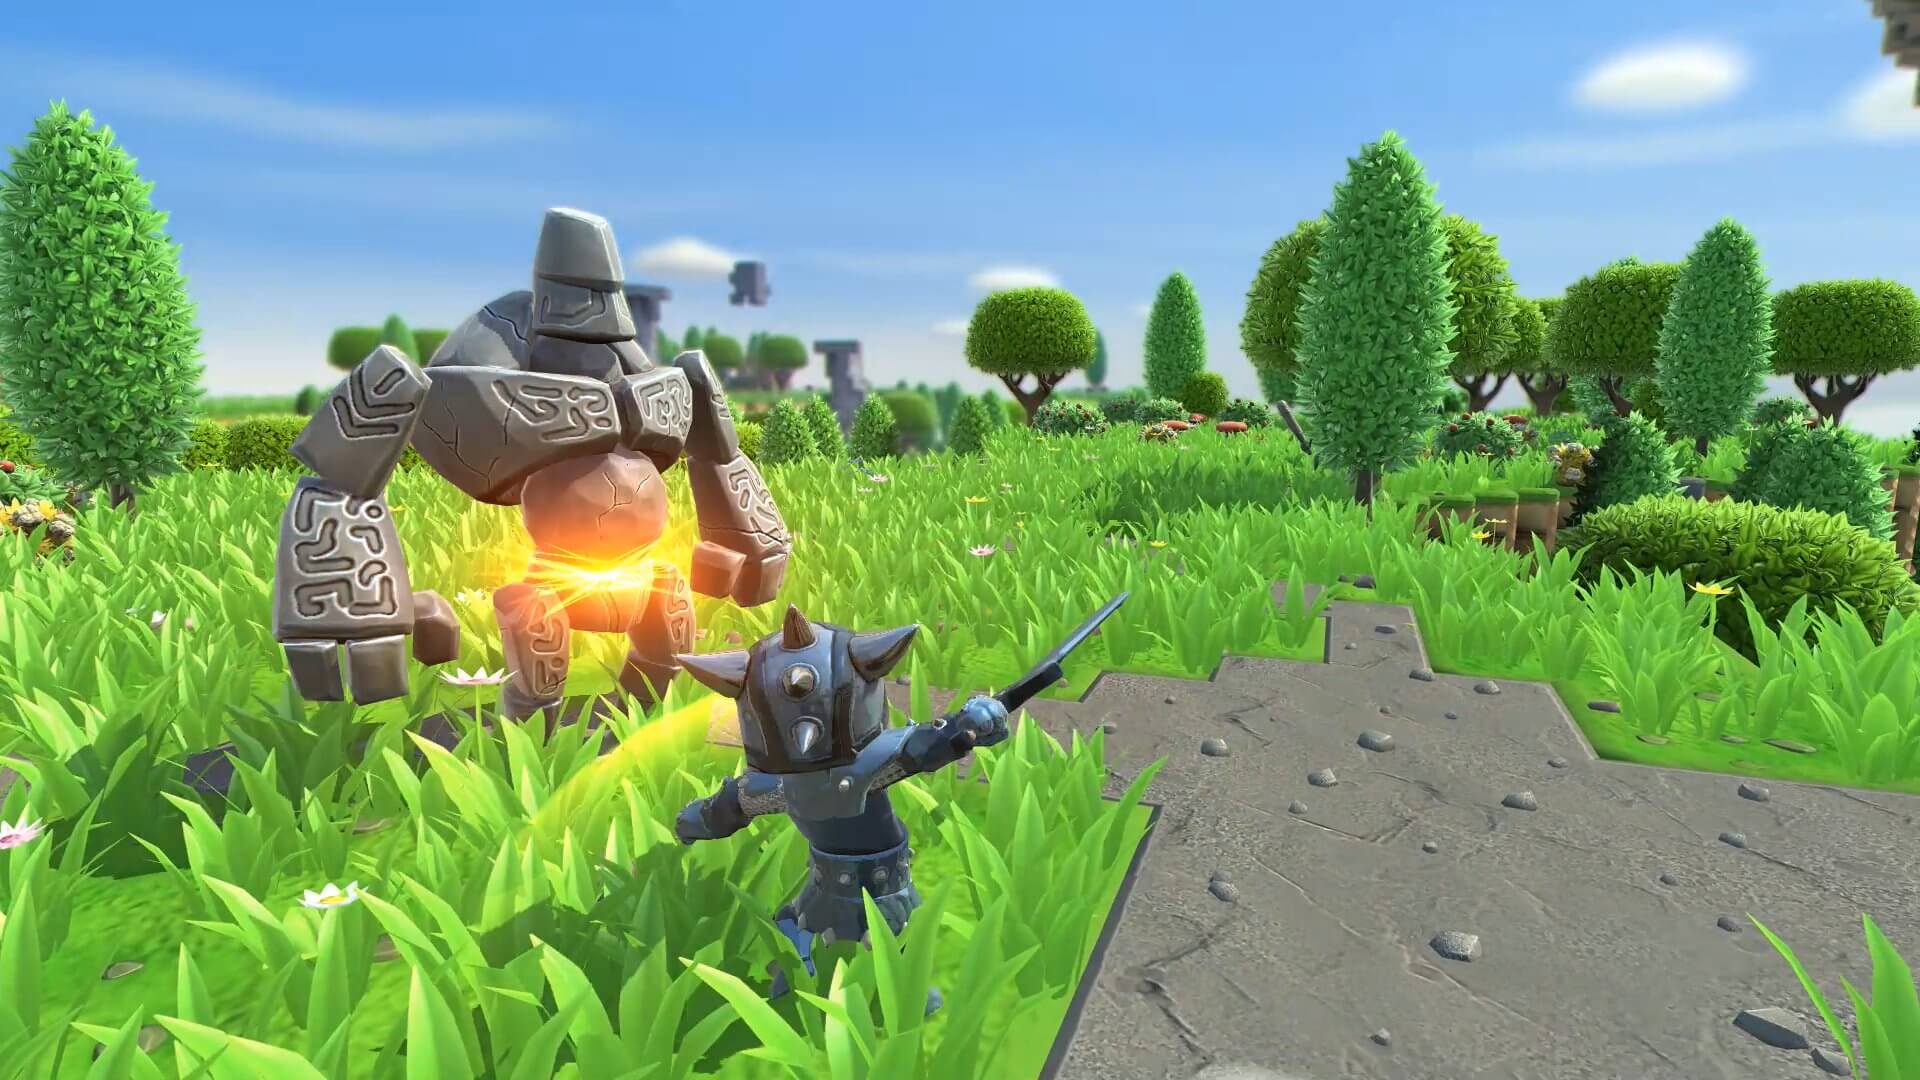 Portal Knights character battling a stone monster with a sword